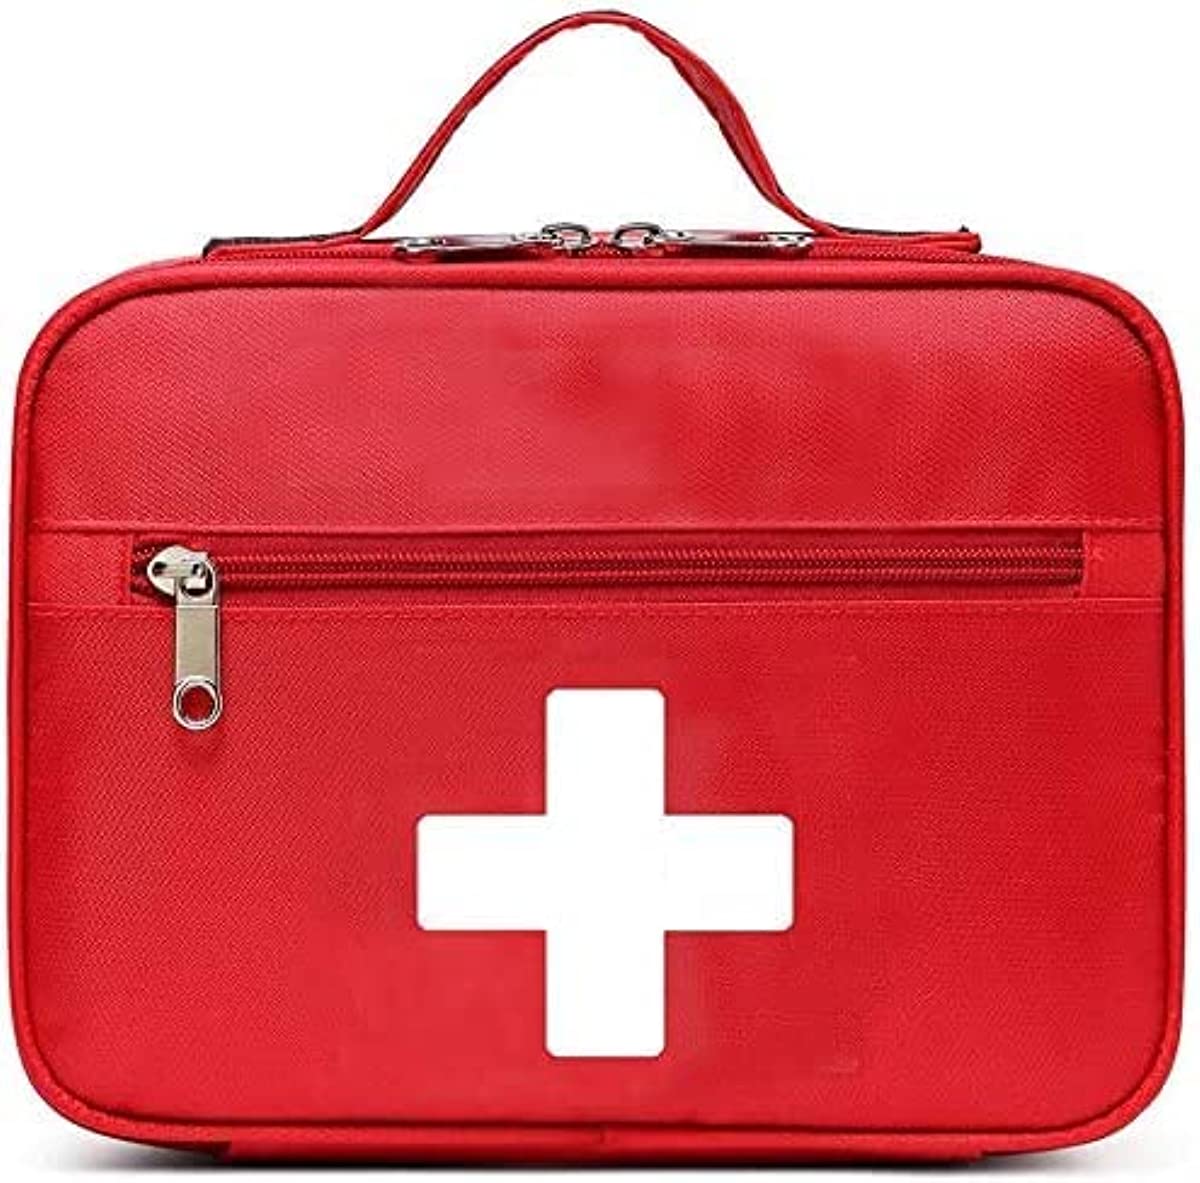 Gatycallaty First Aid Bag Empty Emergency Treatment Medical Bags Multi-Pocket for Home School Office Car Traveling Hiking Trip Daycare (LARGE -RED)